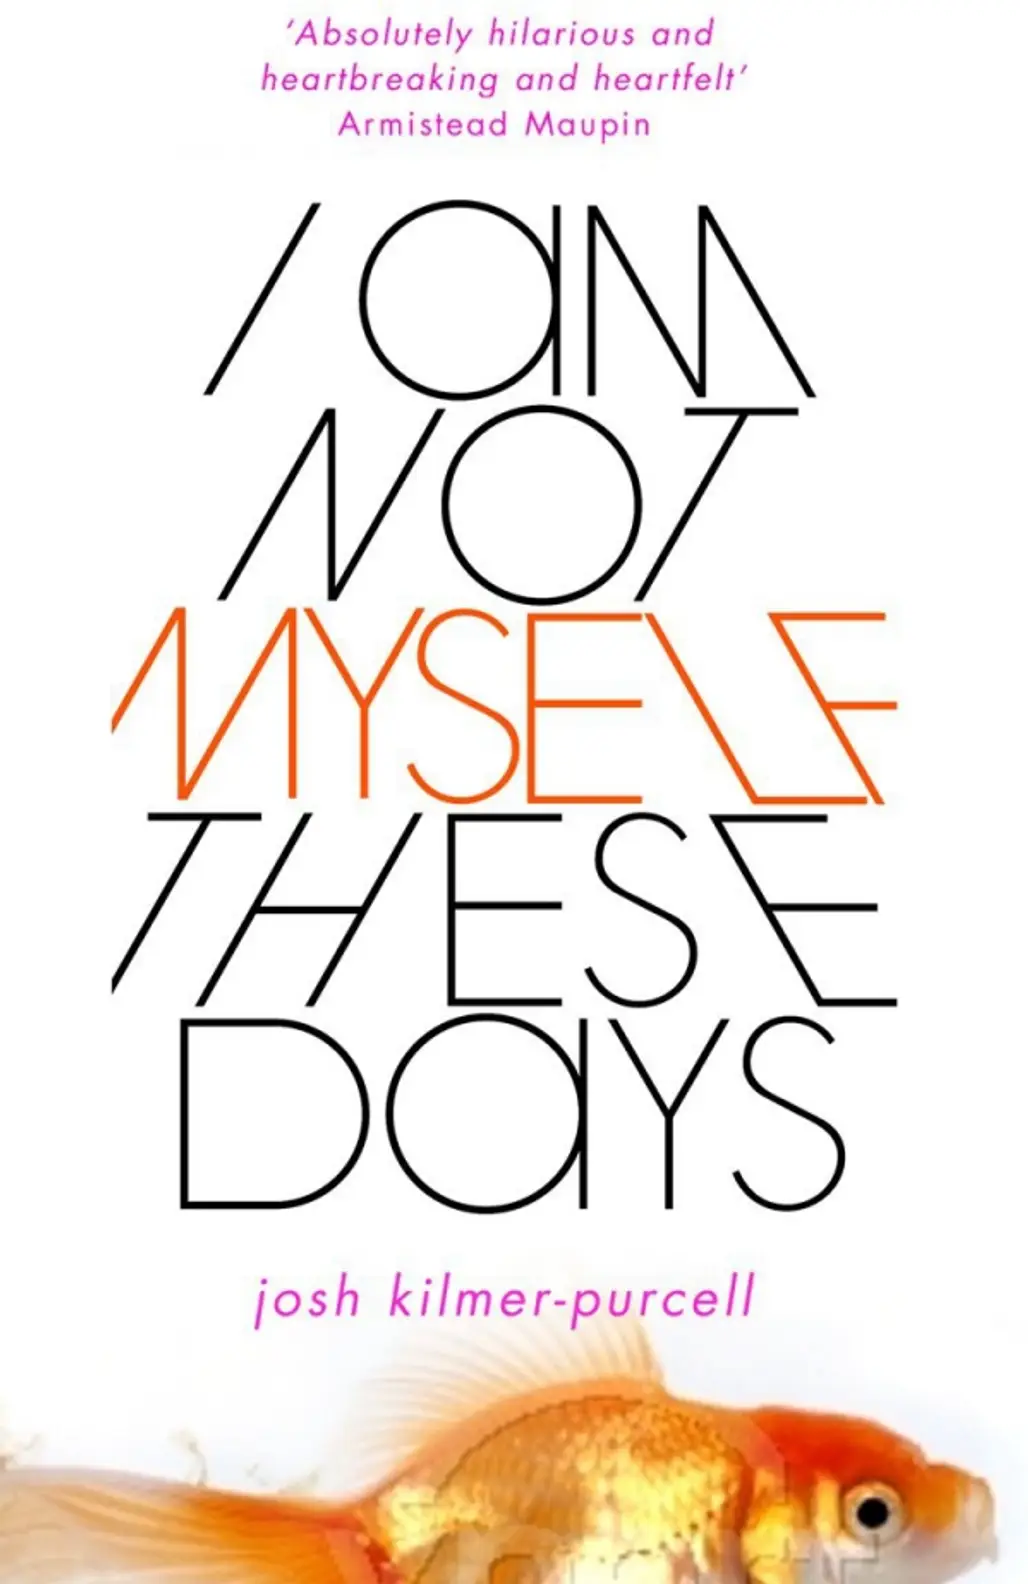 I'm Not Myself These Days by Josh Kilmer-Purcell